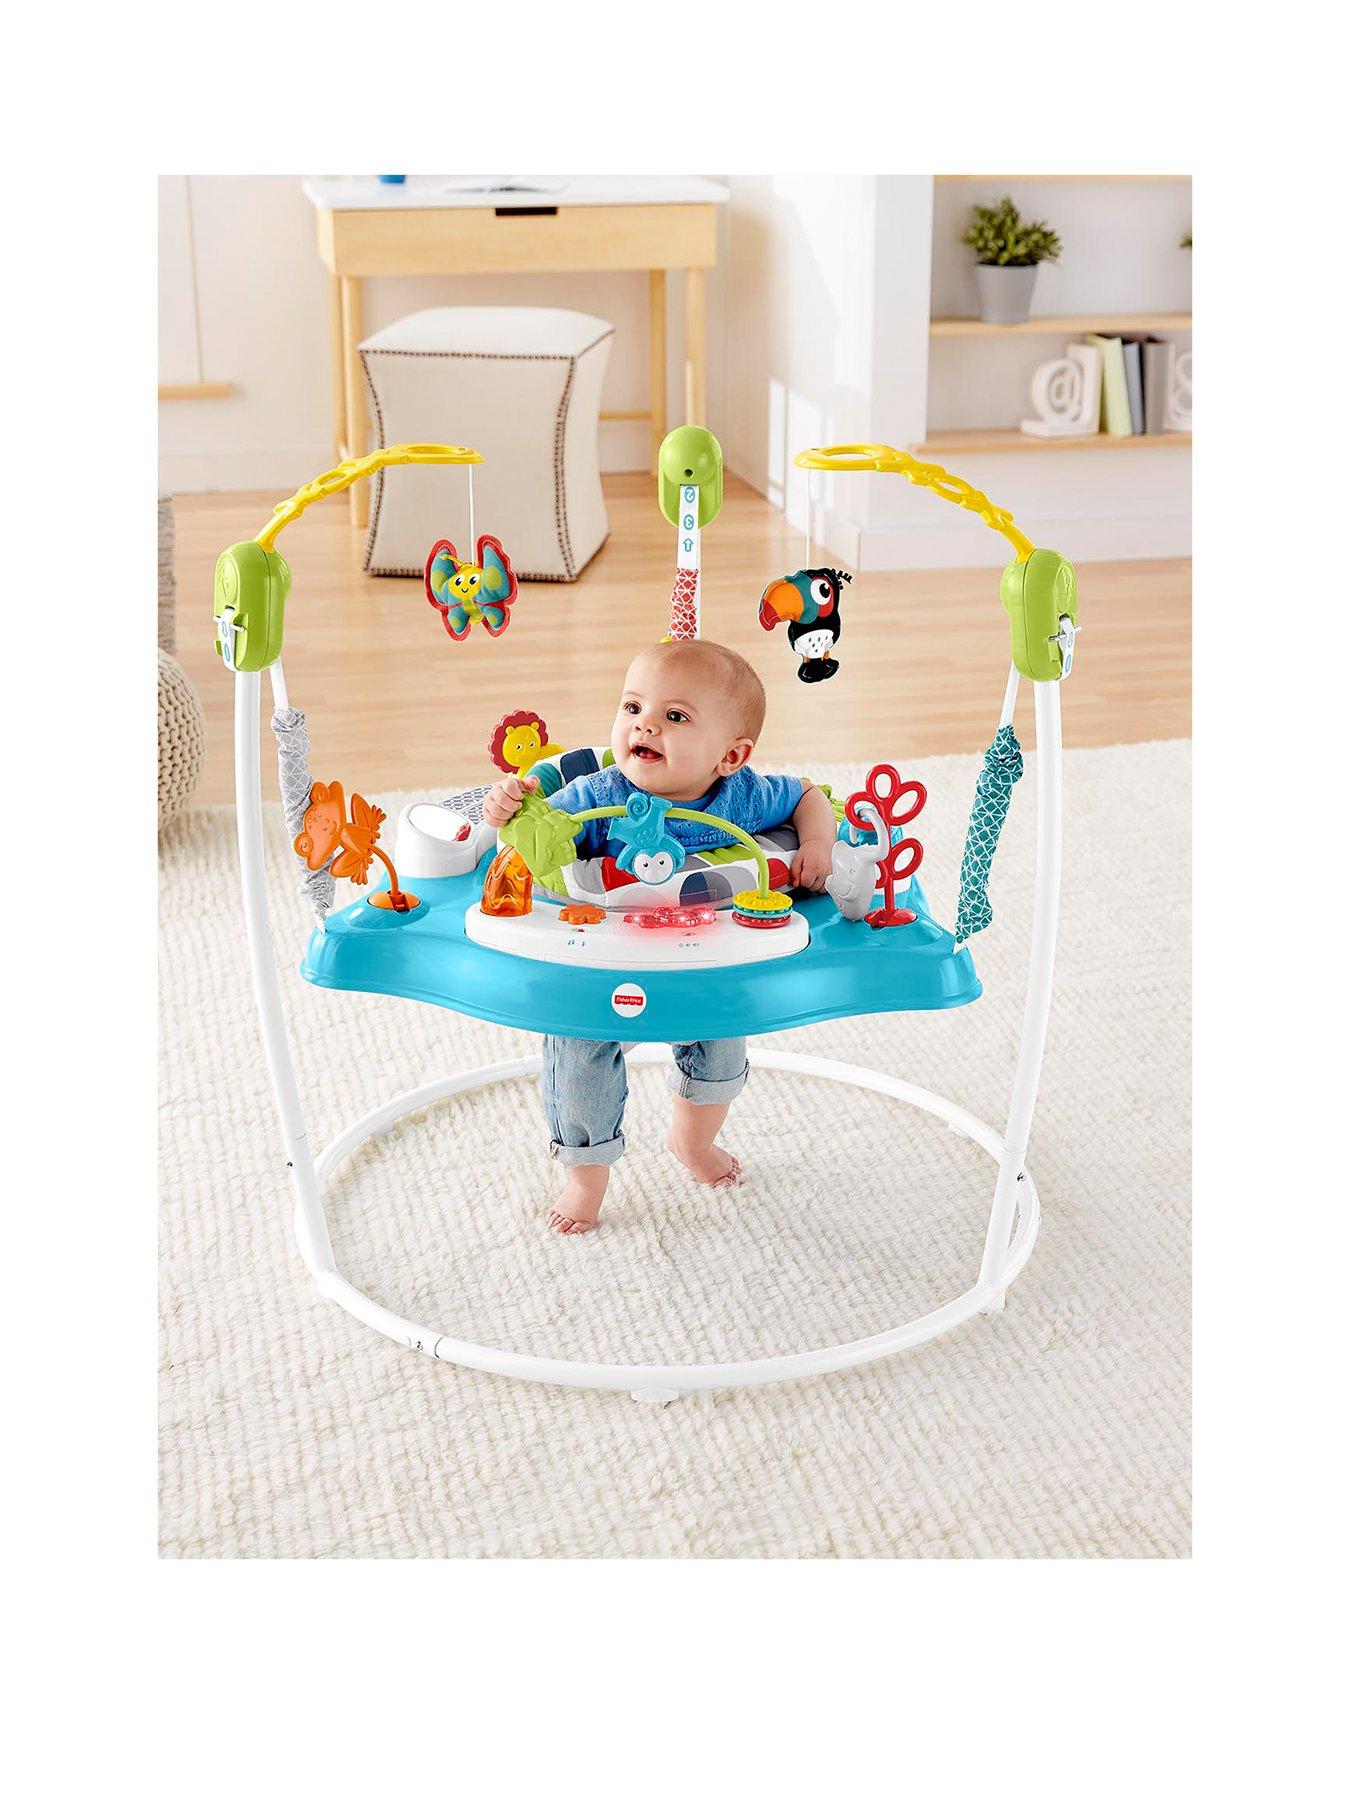 Portable Baby Rocking Chair with Intelligent Music Overhead Mirror Dome & Jingle Bell Lamb Soothing Portable Swing for Newborns Multicolour 8 Preset Lullabies Electric Baby Swing 